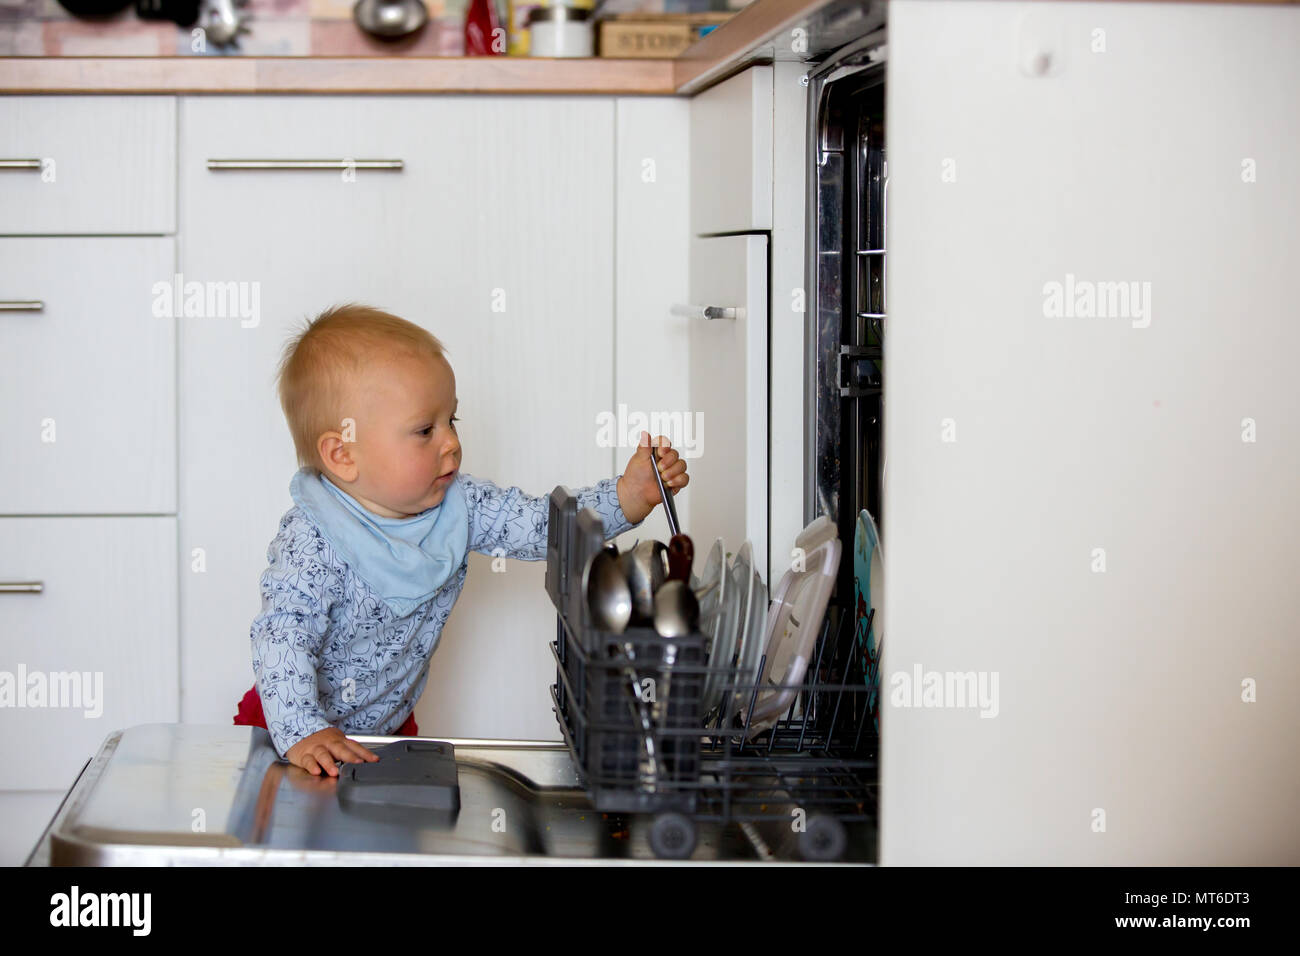 Toddler child, boy, helping mom, putting dirty dishes in dishwasher at home, modern kitchen Stock Photo